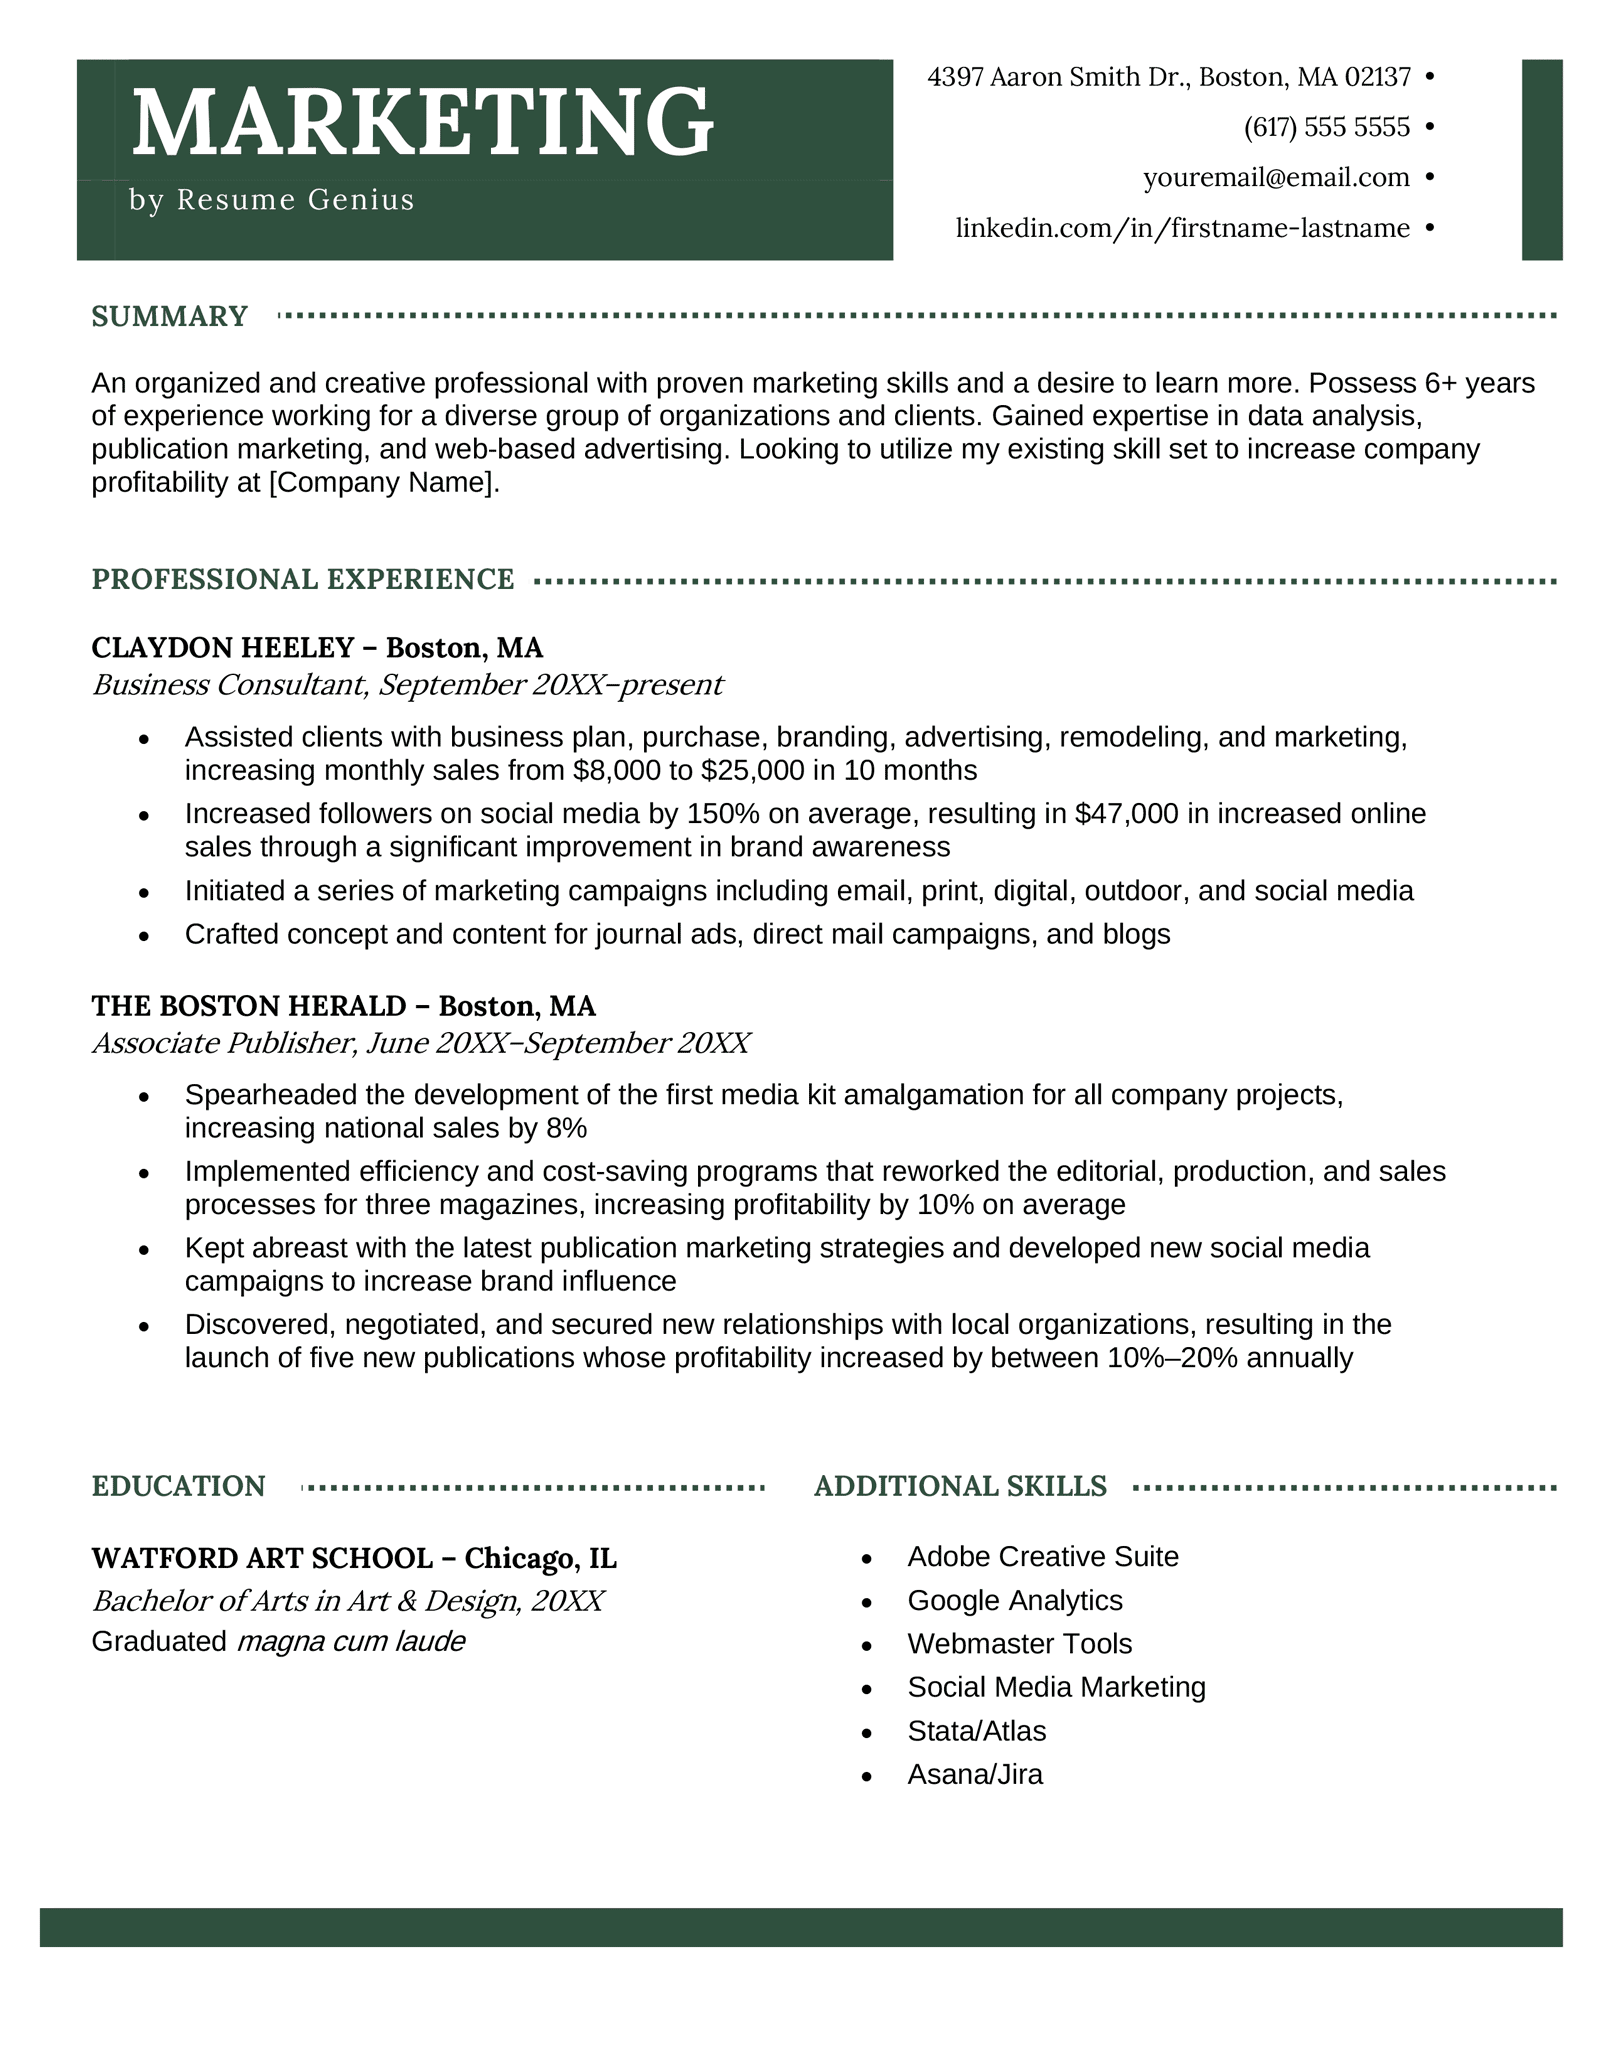 Marketing resume example and template for job seekers to download and use